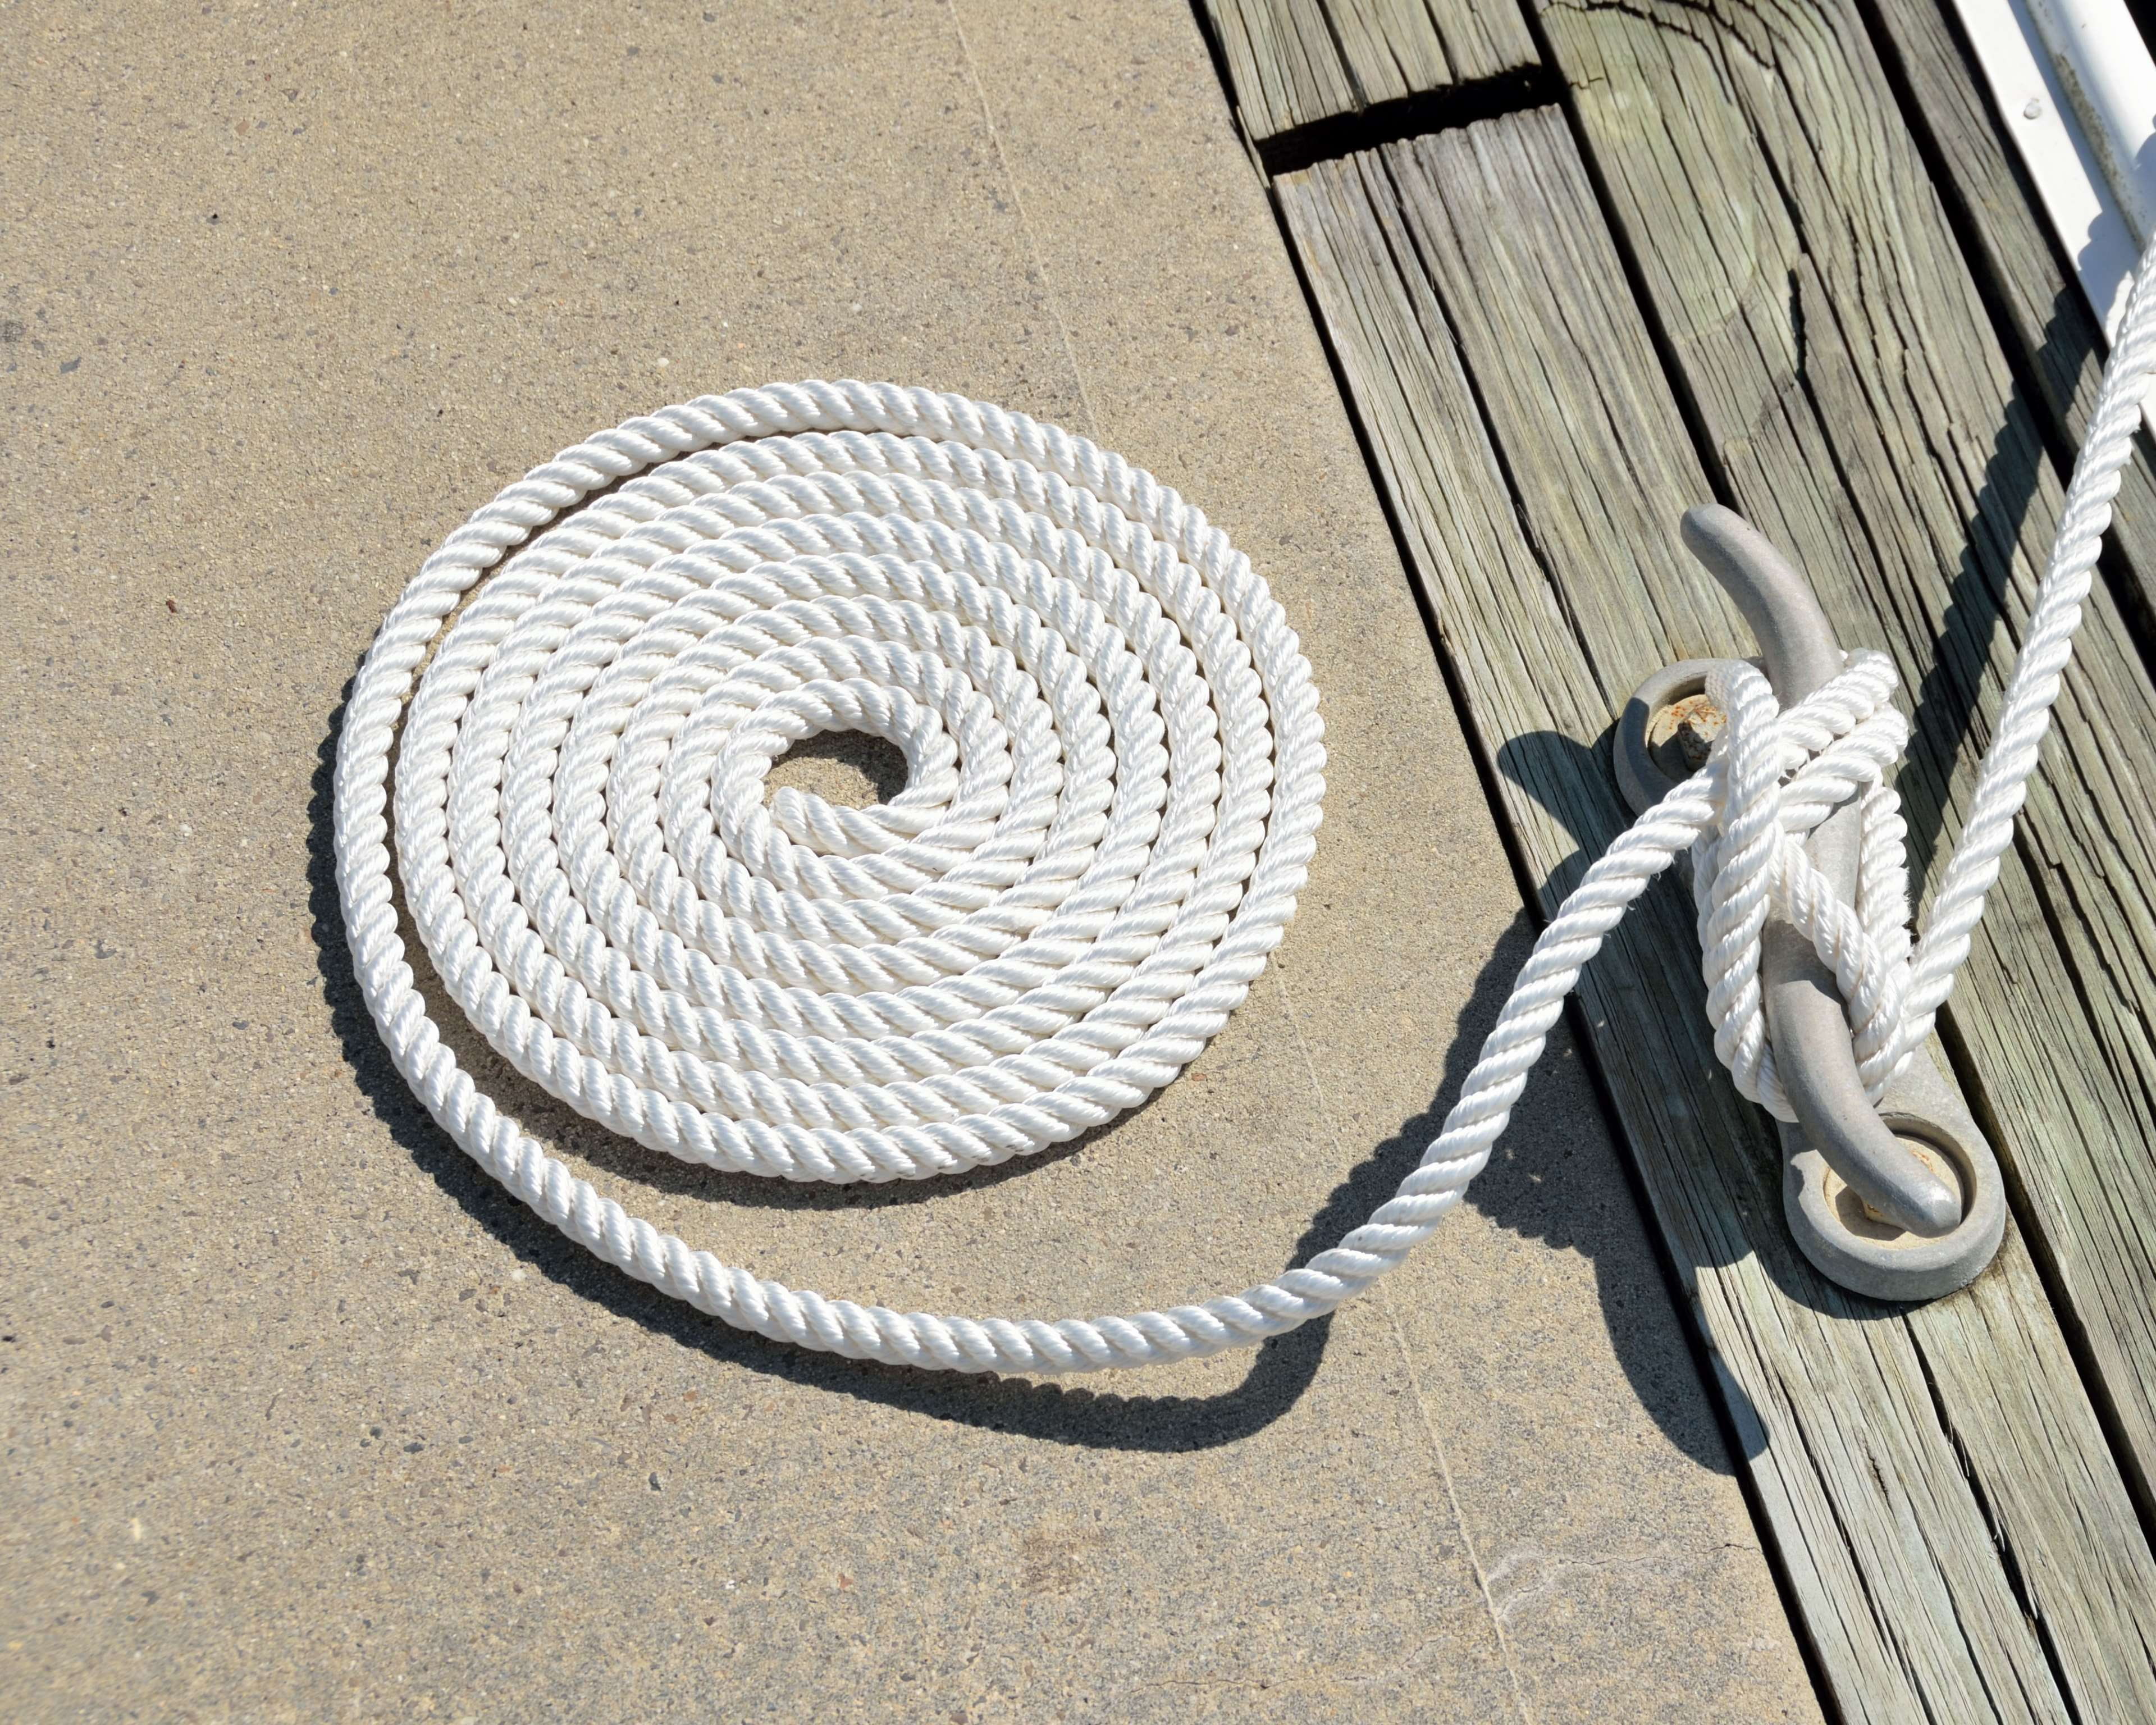 boating, cleat, close up, cord, design, dock, equipment, knot